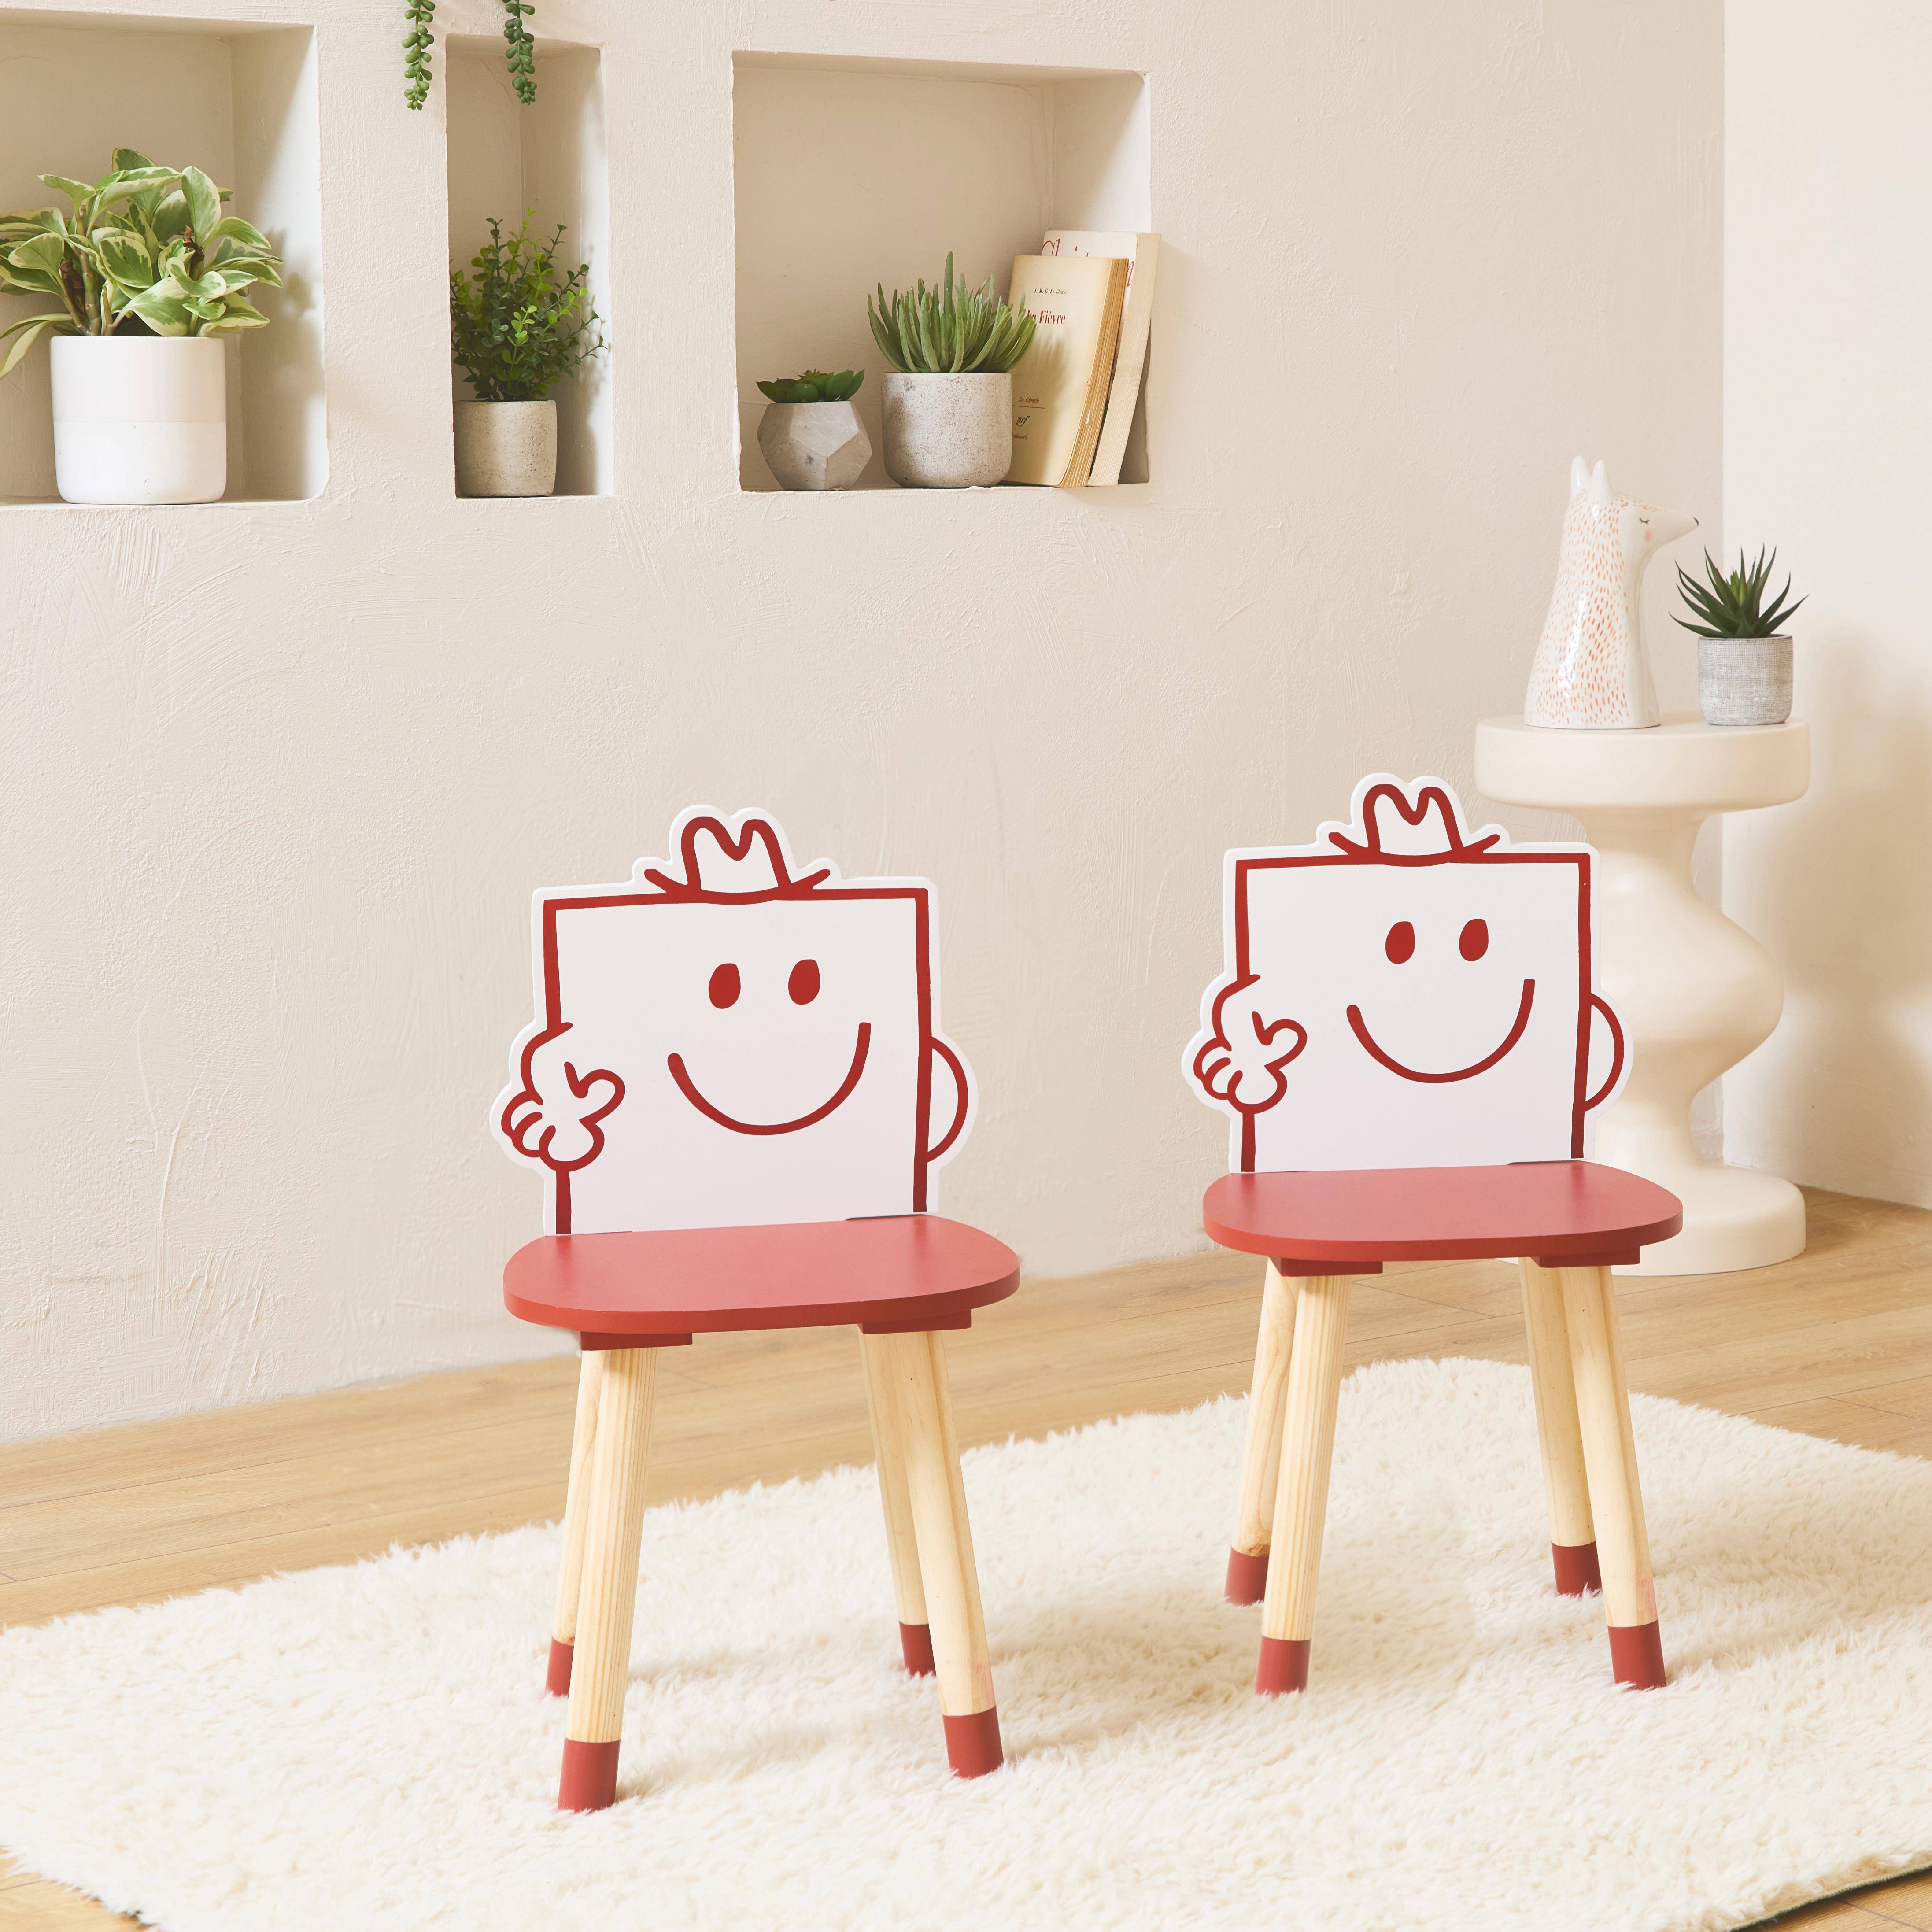 Set of 2 children's chairs, Mr. Men & Little Miss collection - Mr. Strong , Pierre, red,sweeek,Photo2